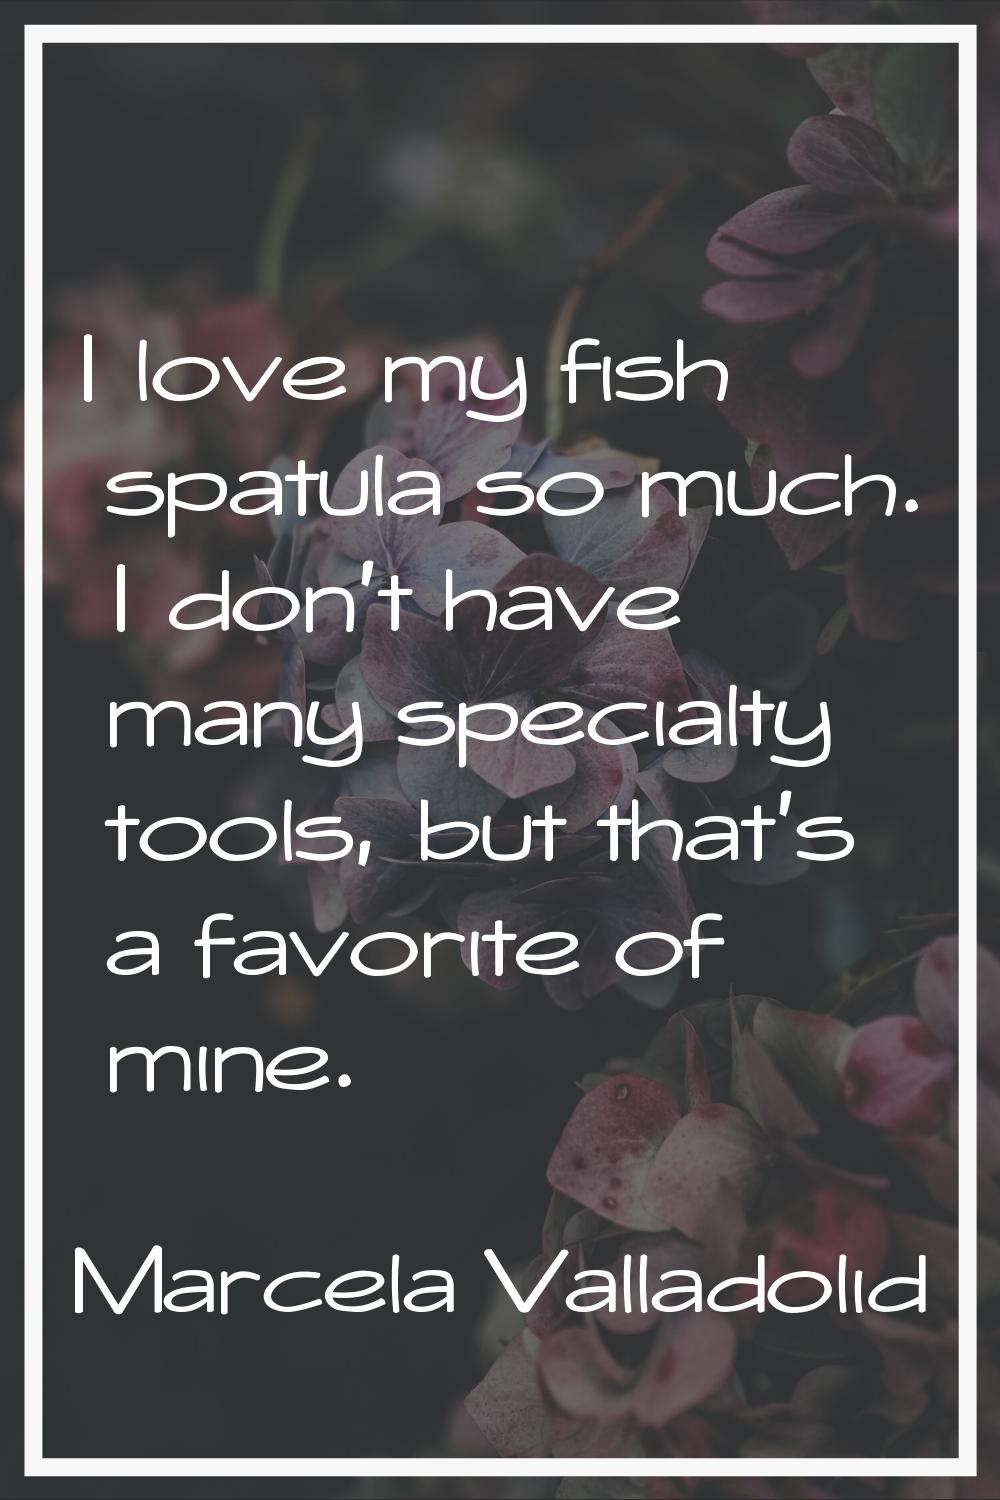 I love my fish spatula so much. I don't have many specialty tools, but that's a favorite of mine.